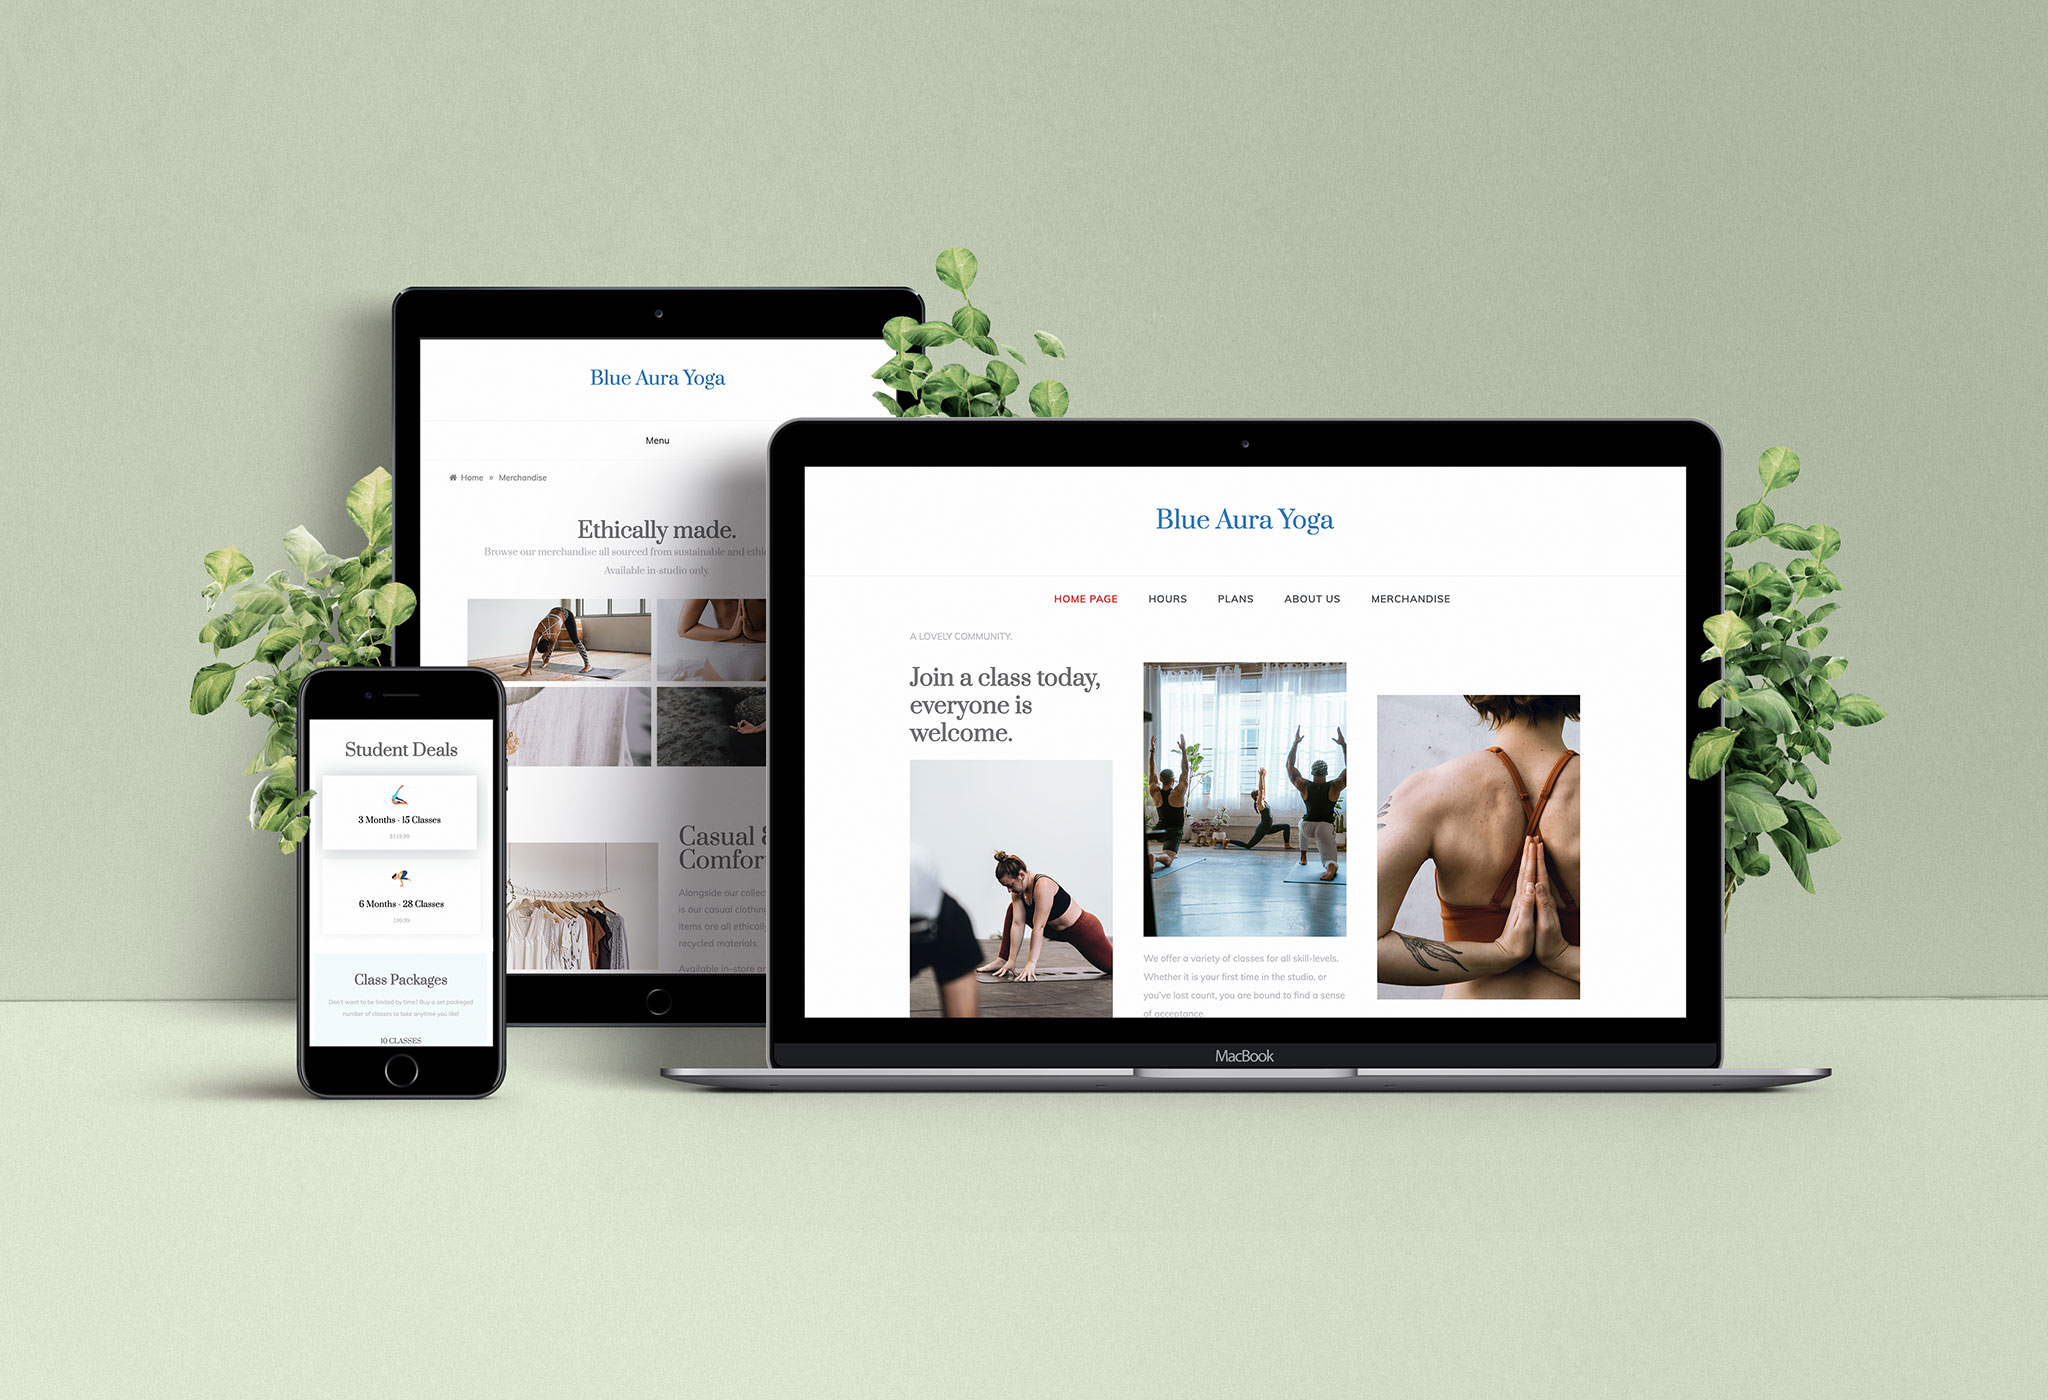 Mockup of website design for an imagined yoga studio. It is a completely responsive web design, as displayed on a laptop, mobile, and an iPhone.